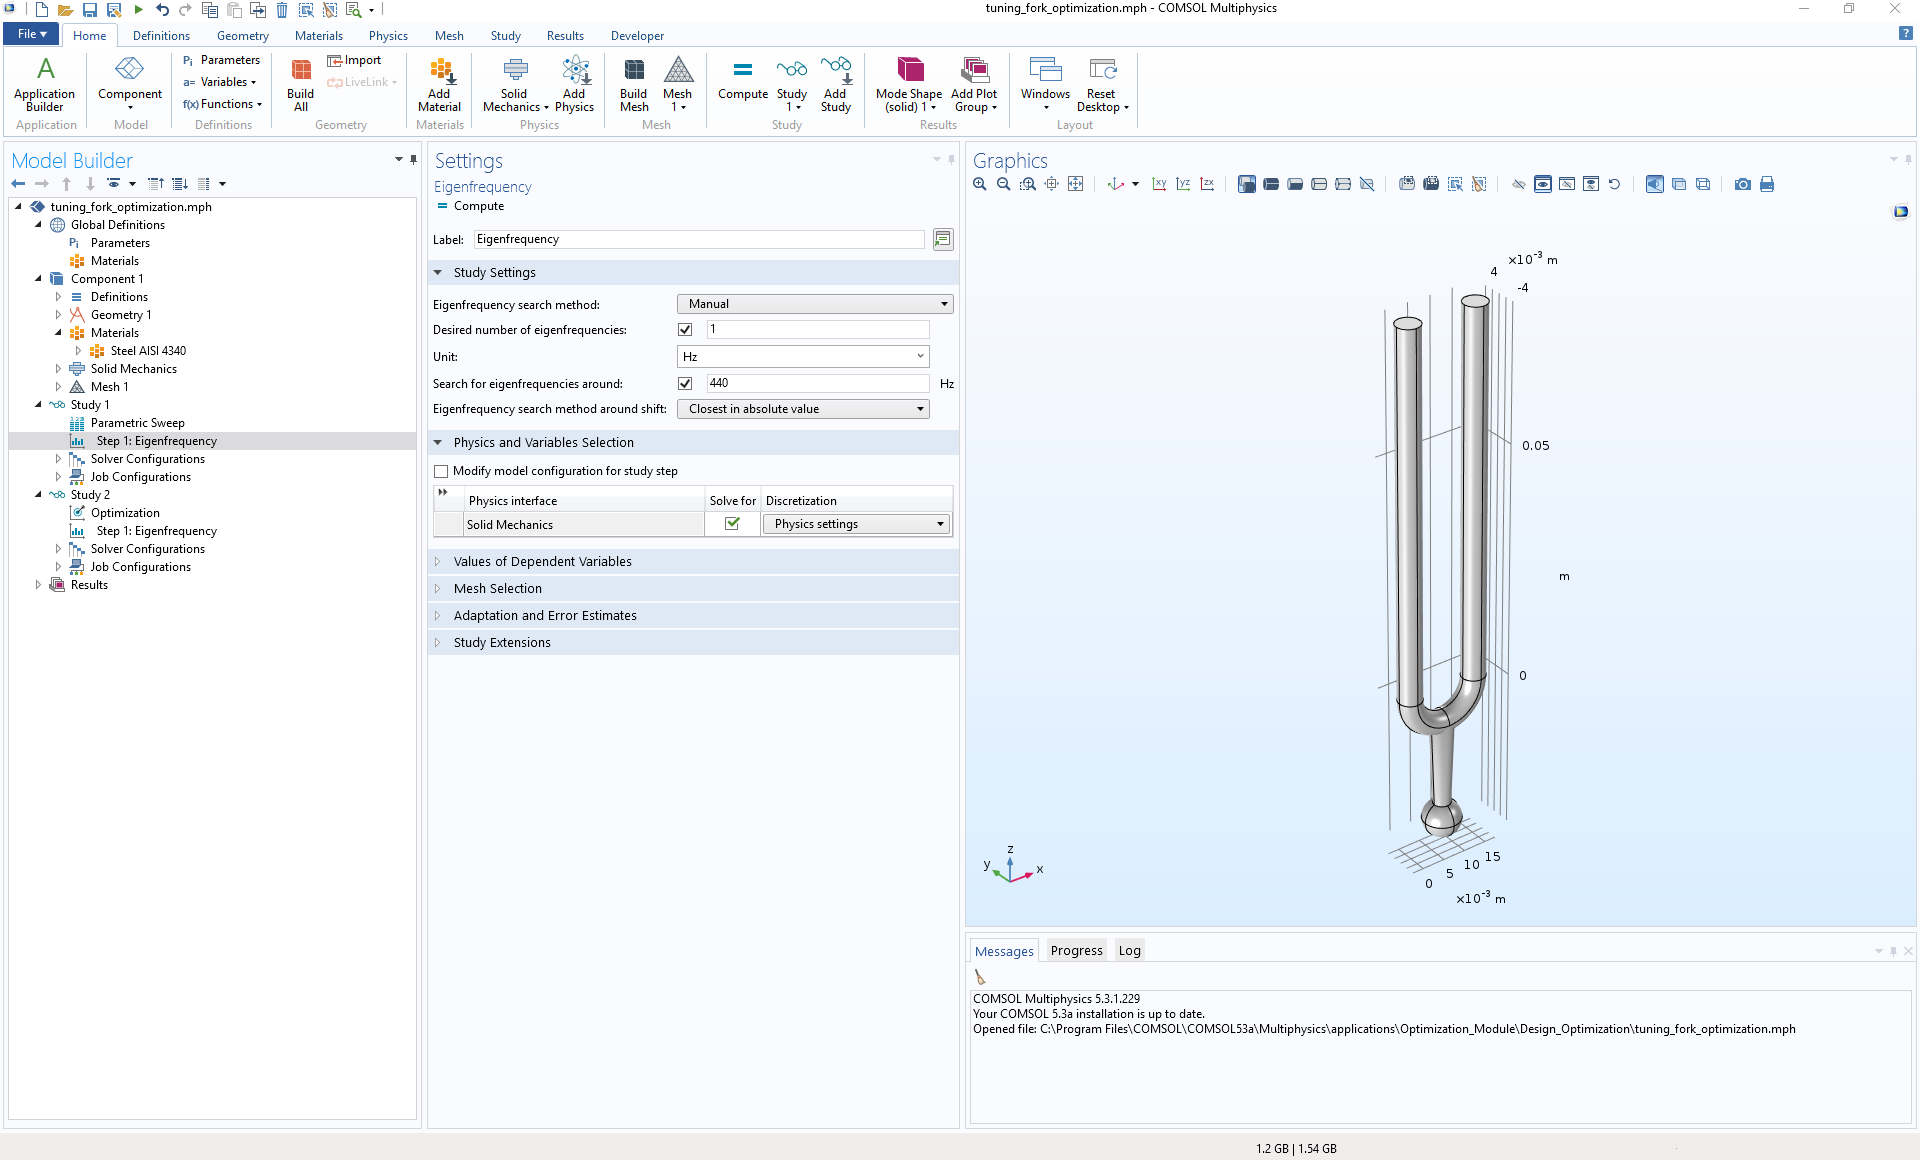 A screenshot of the COMSOL Multiphysics GUI with a tuning fork model in the Graphics window.